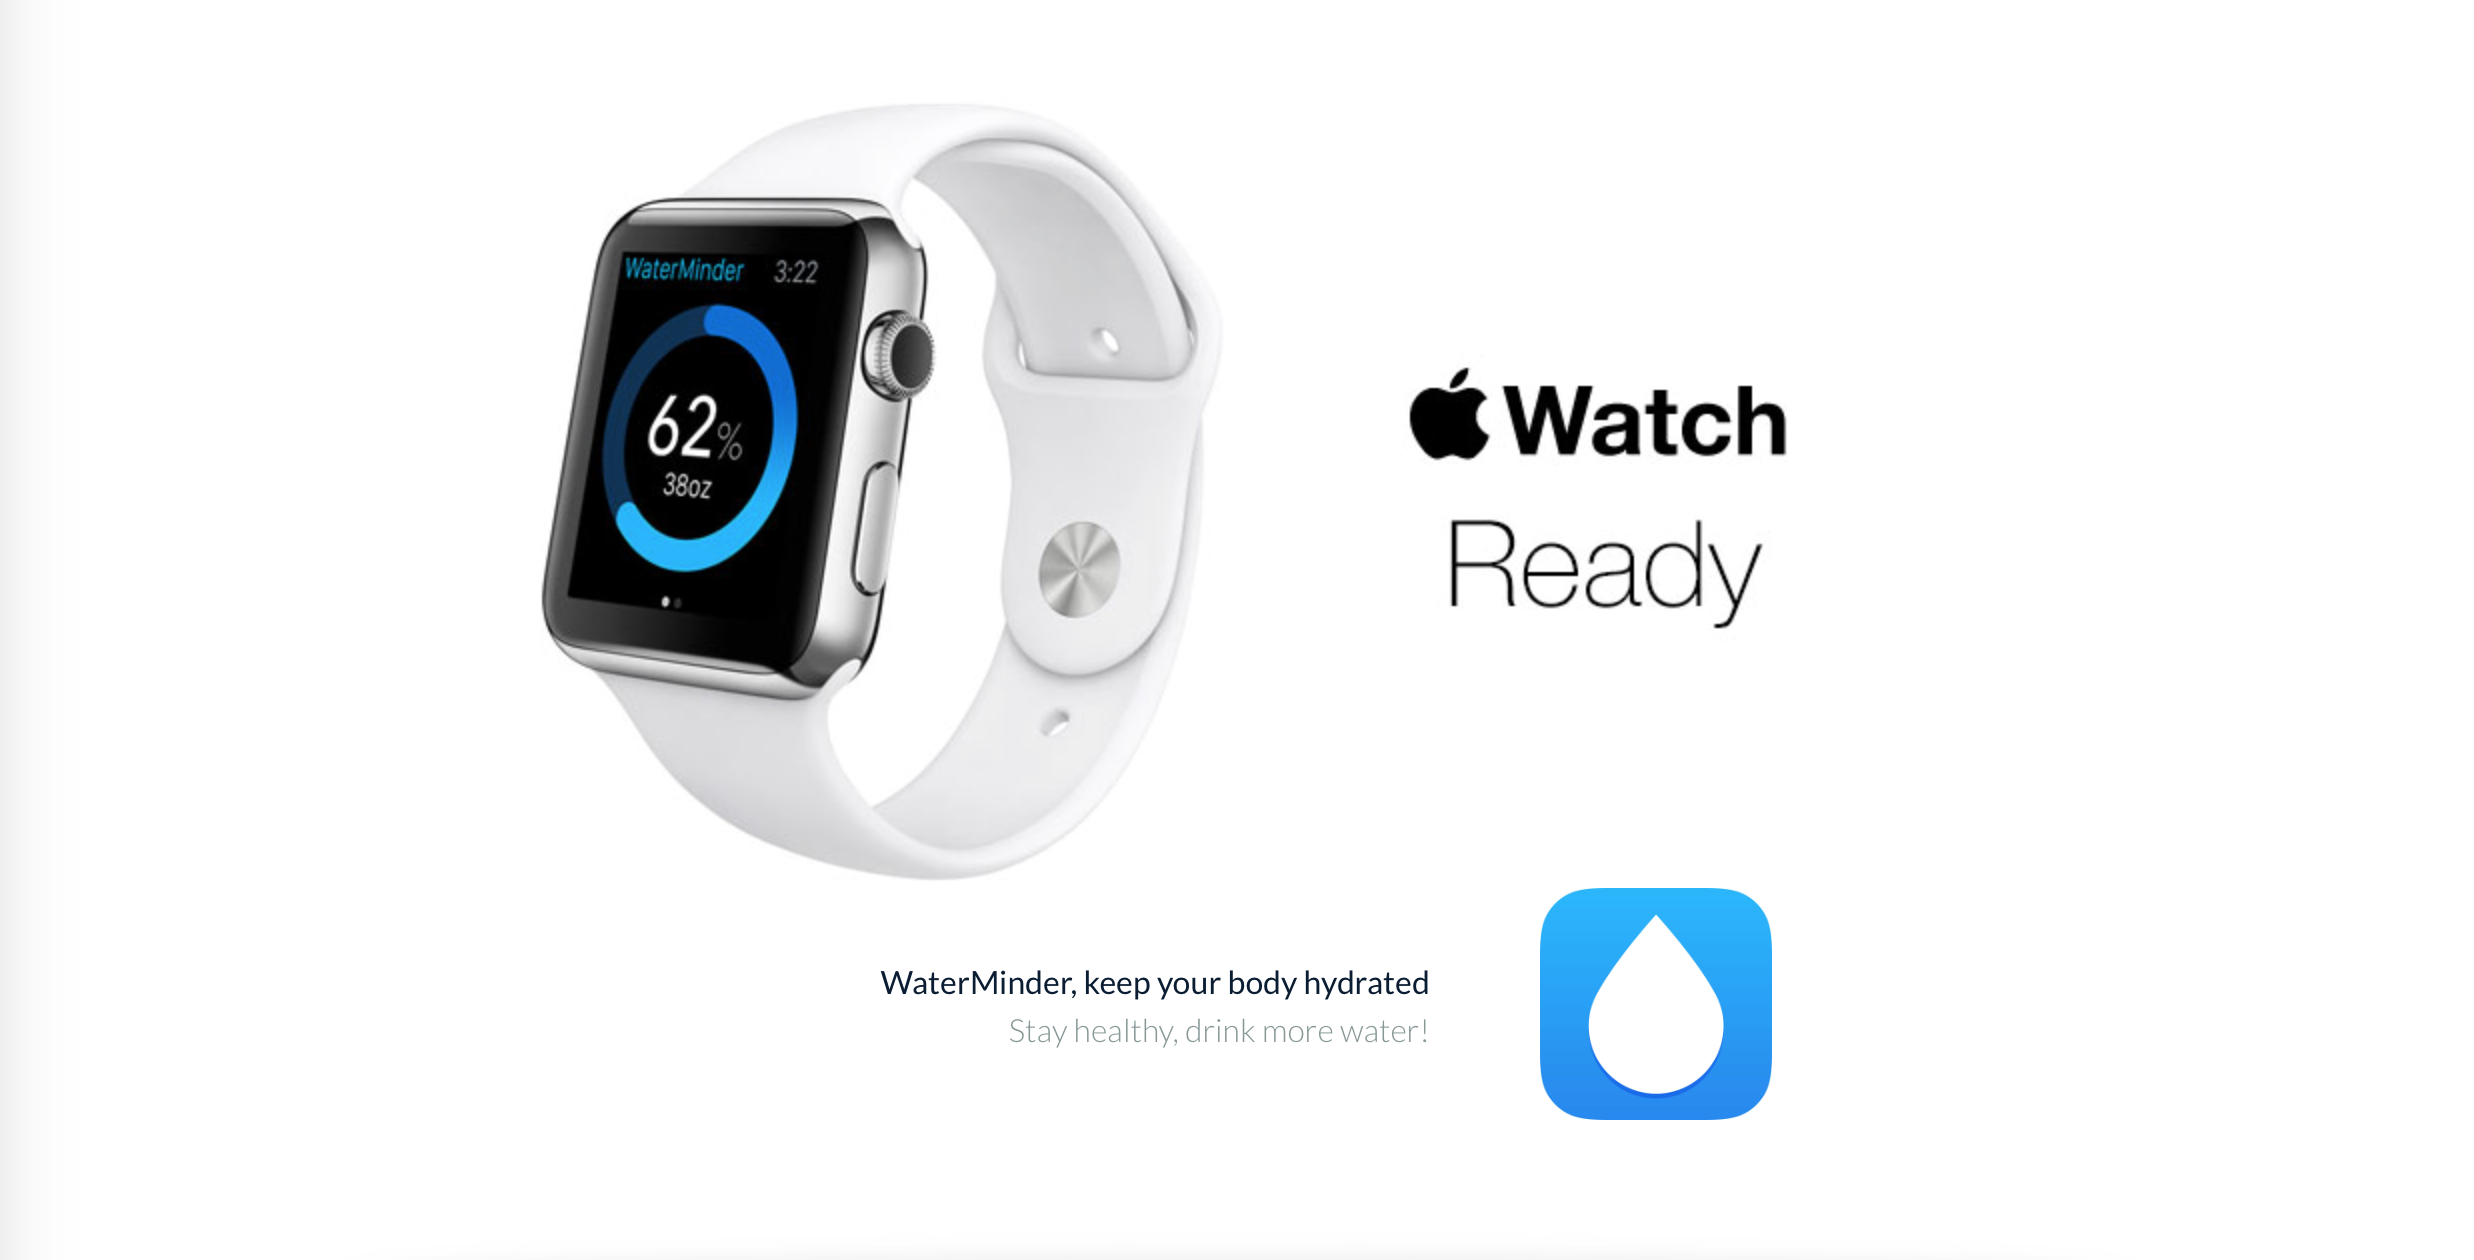 Track your water intake using your Apple Watch and WaterMinder